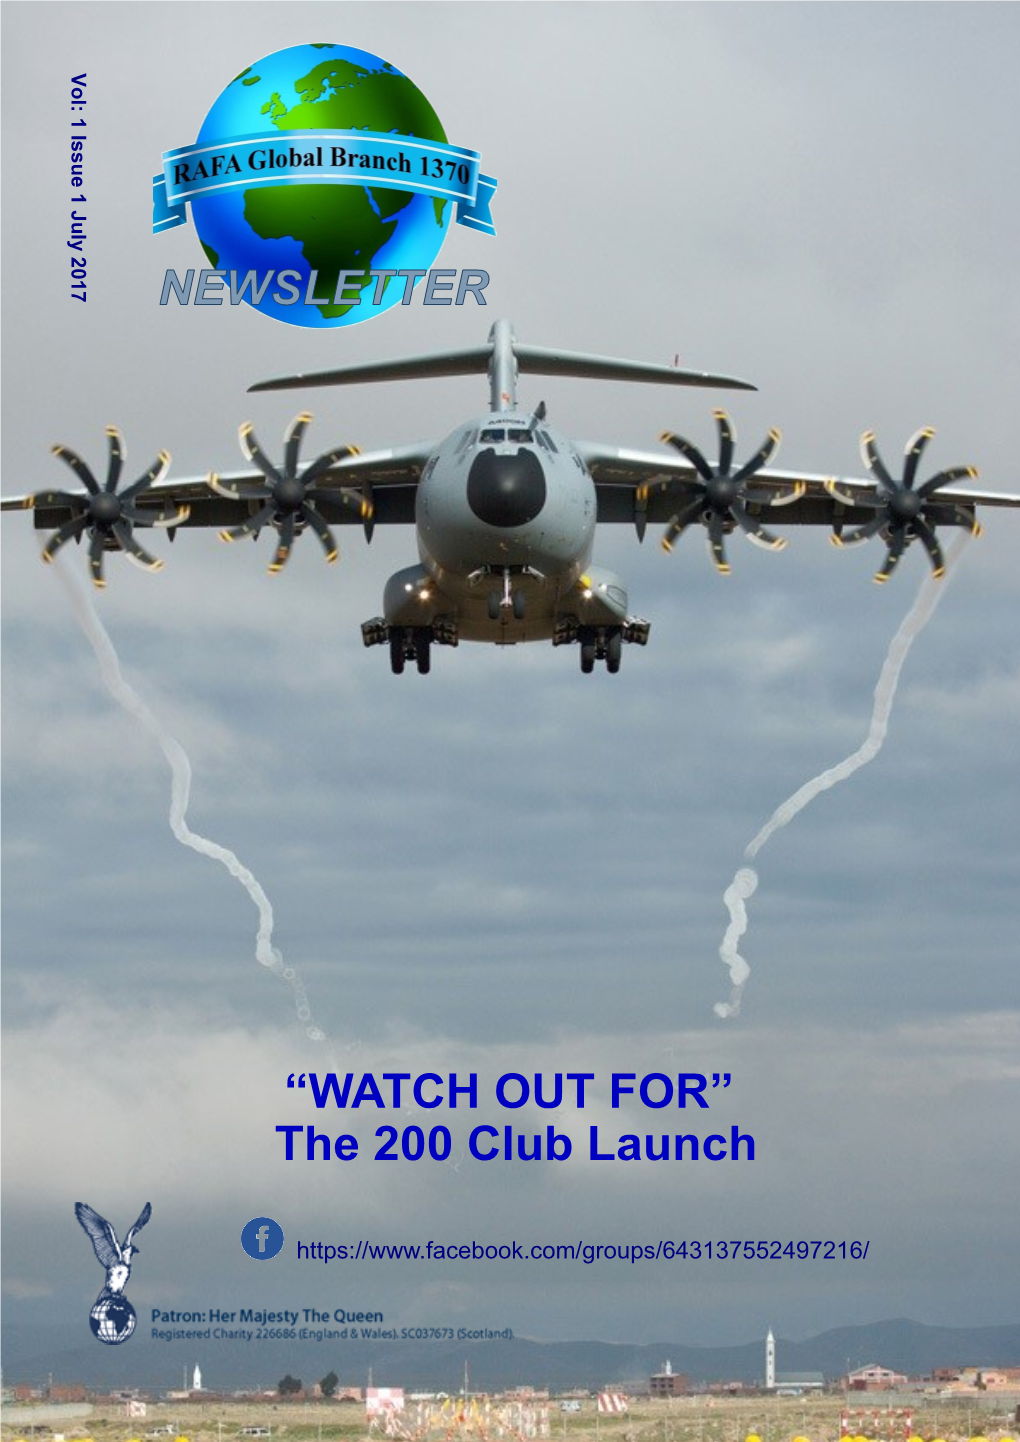 “WATCH out FOR” the 200 Club Launch